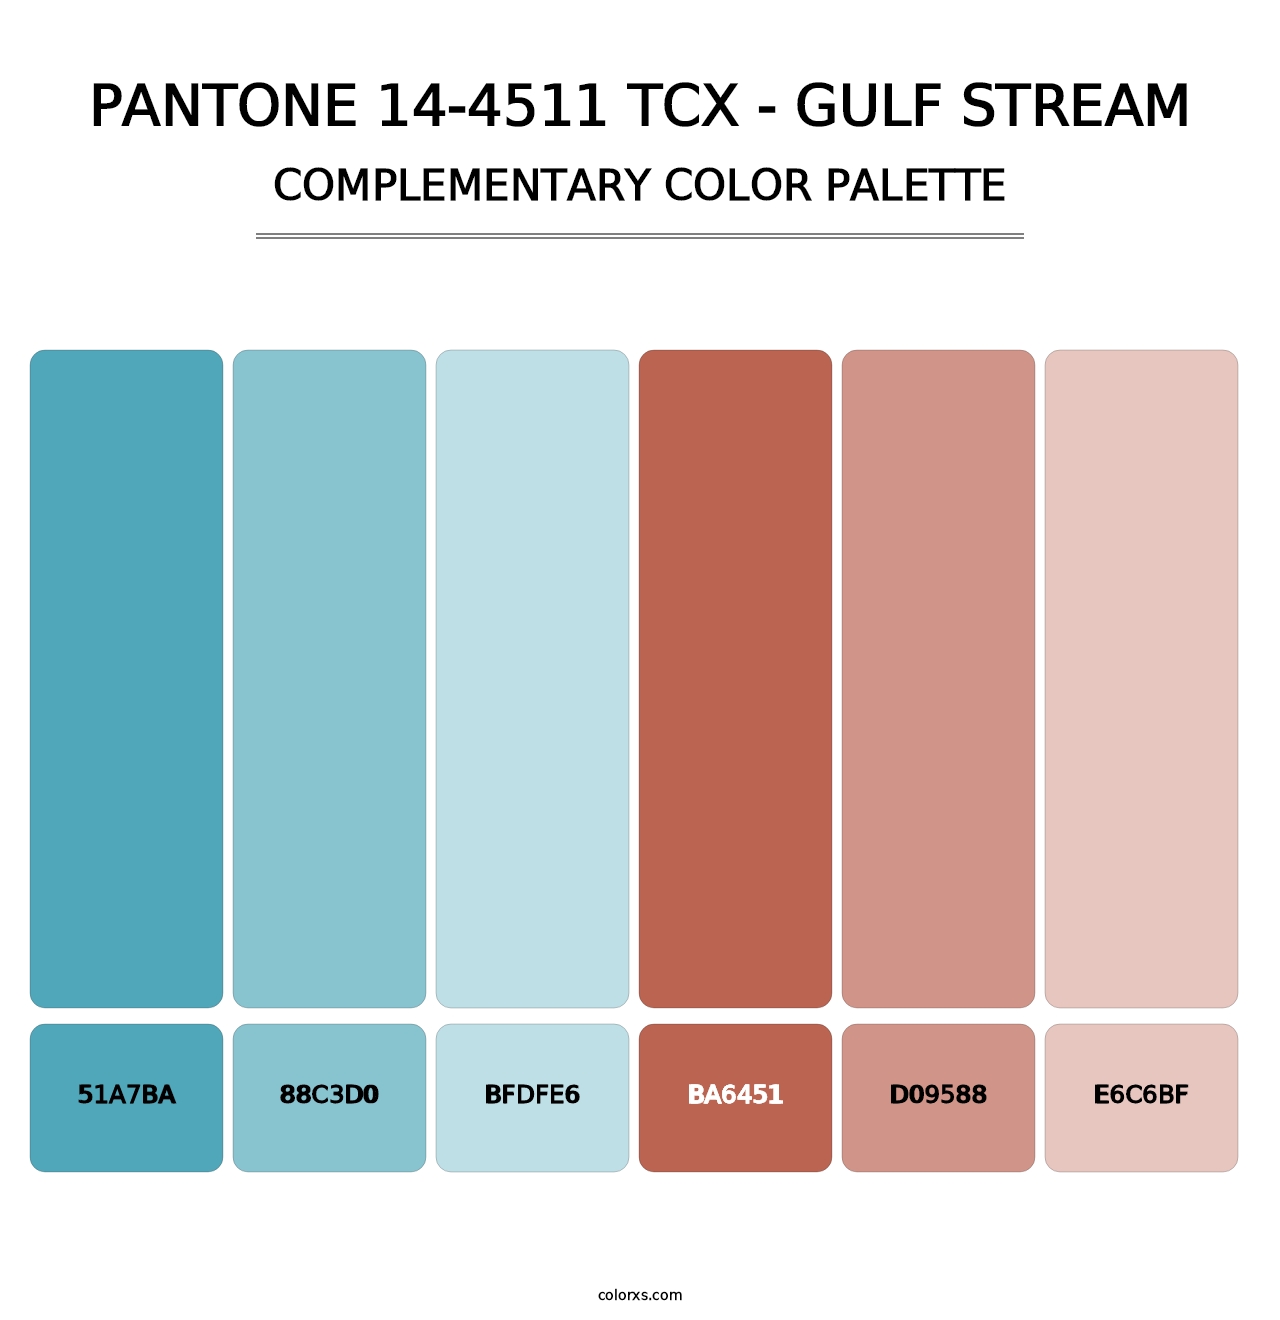 PANTONE 14-4511 TCX - Gulf Stream - Complementary Color Palette